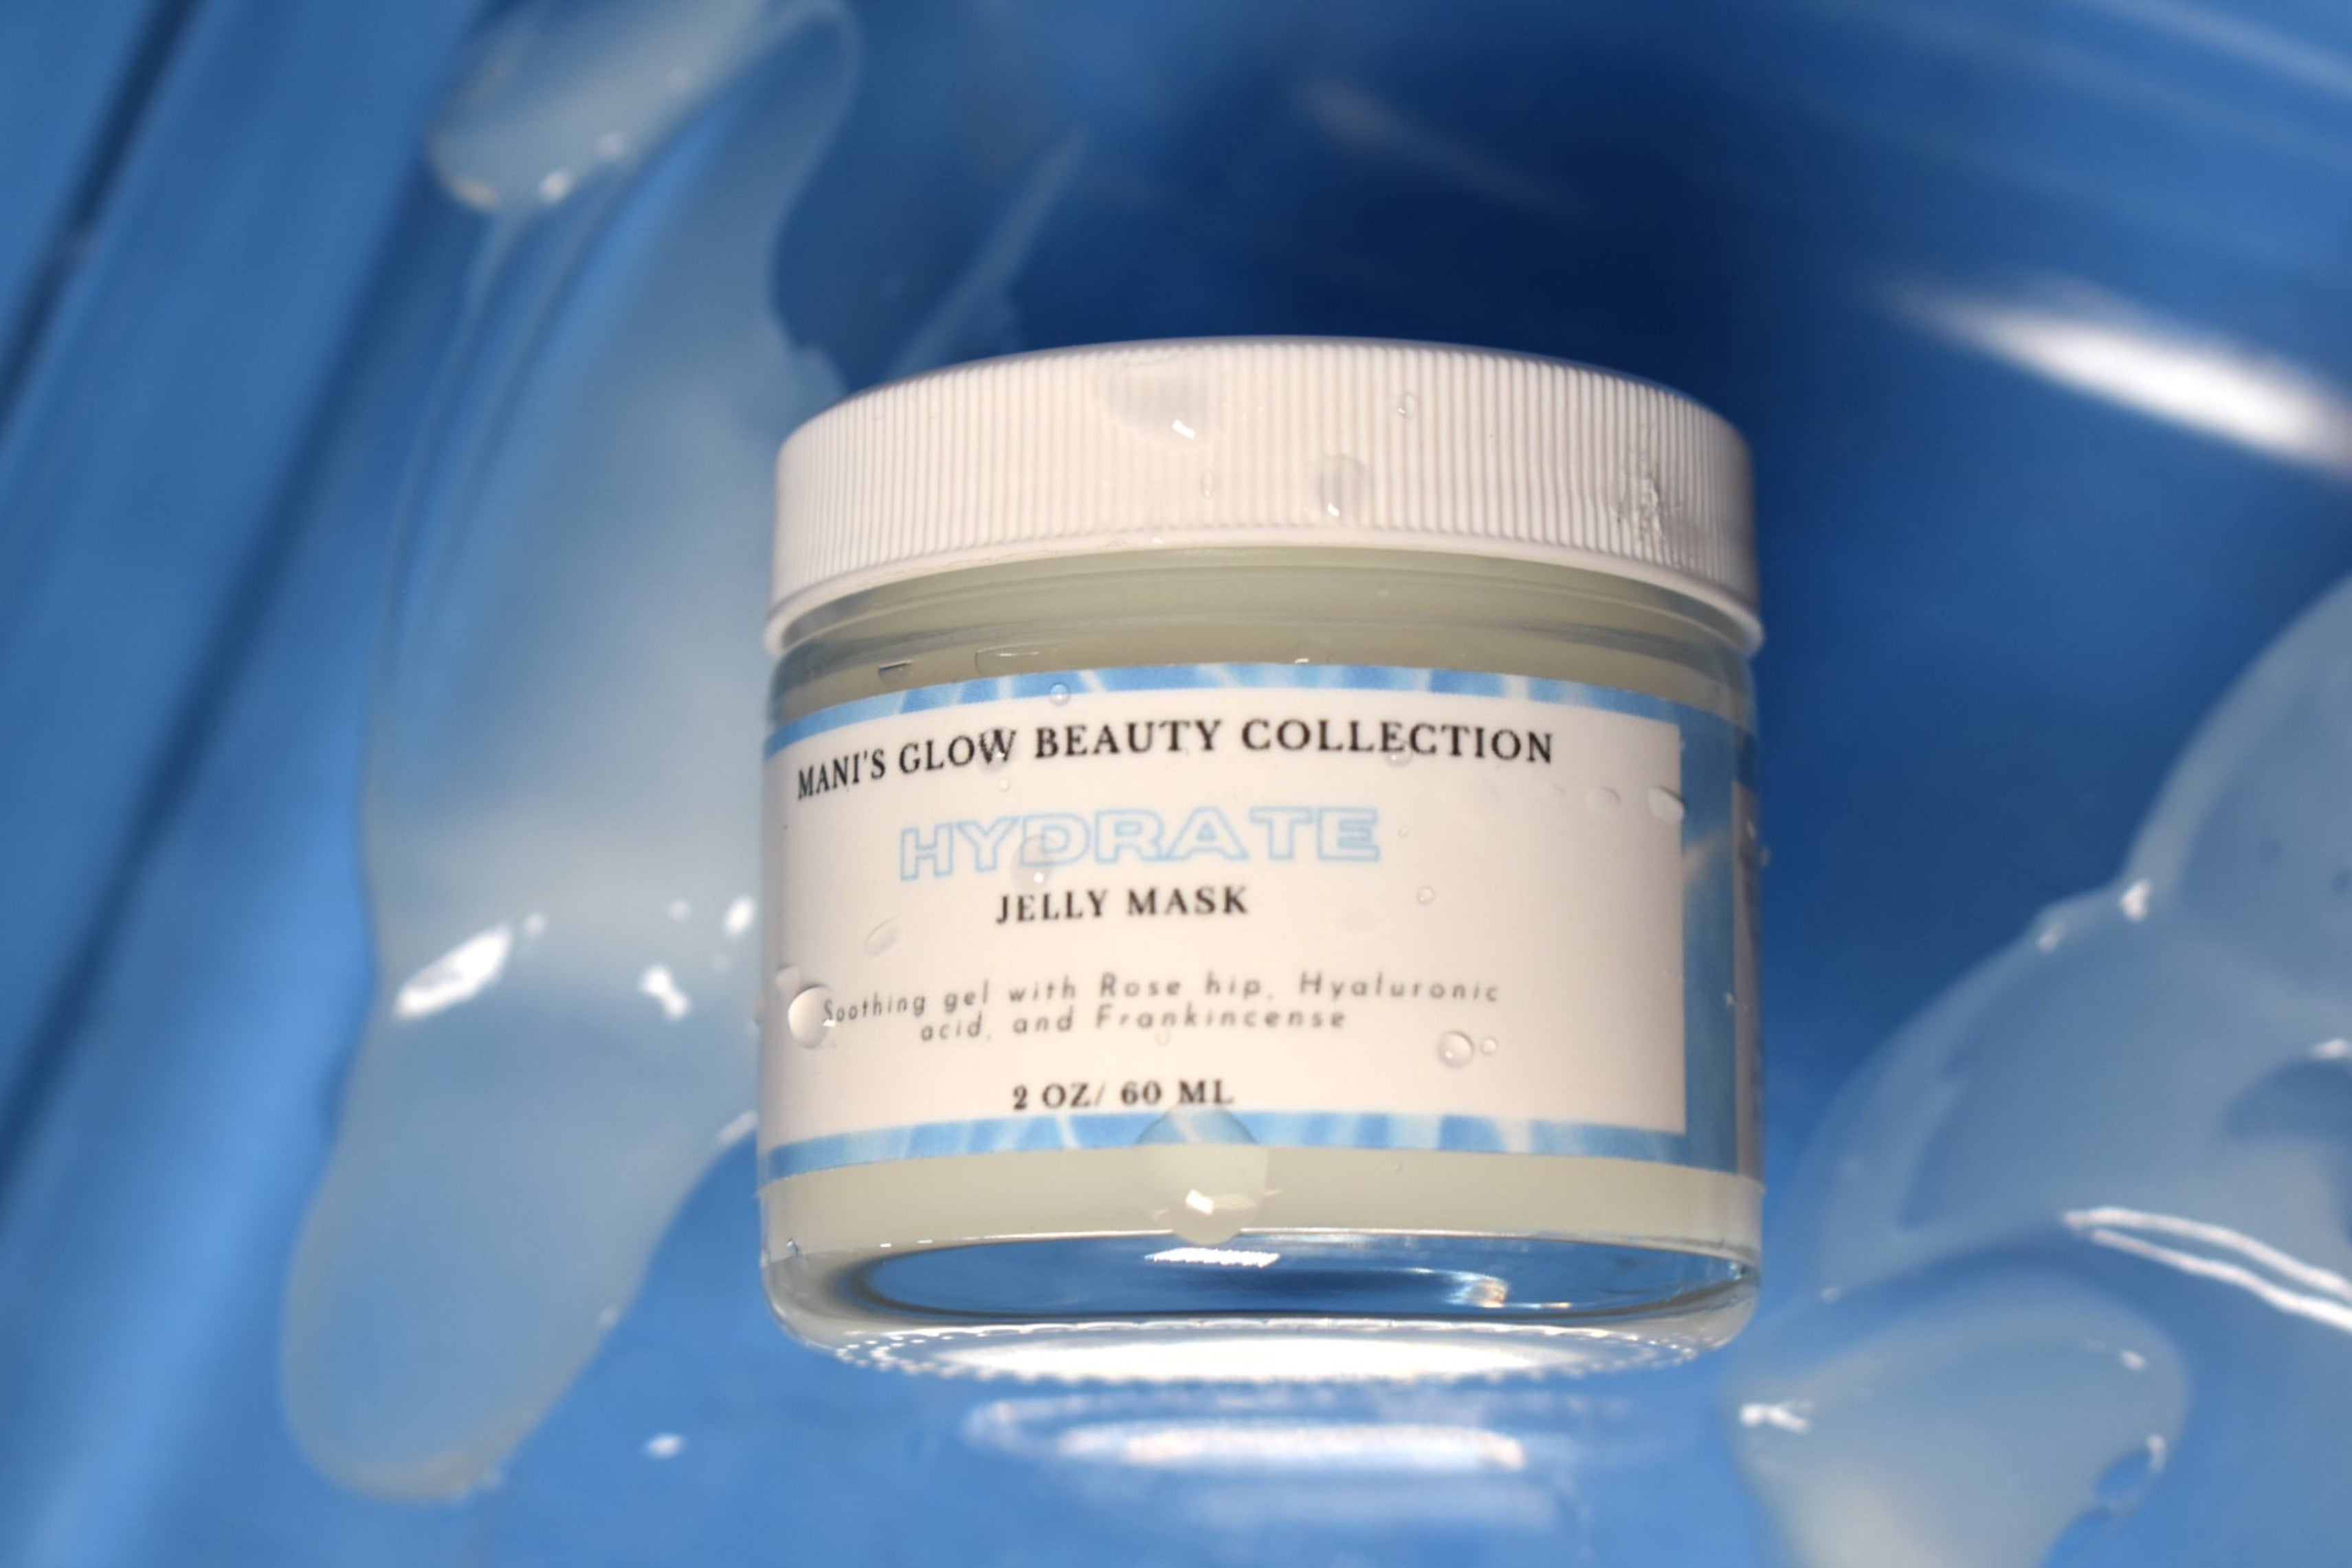 Hydrate Jelly Mask